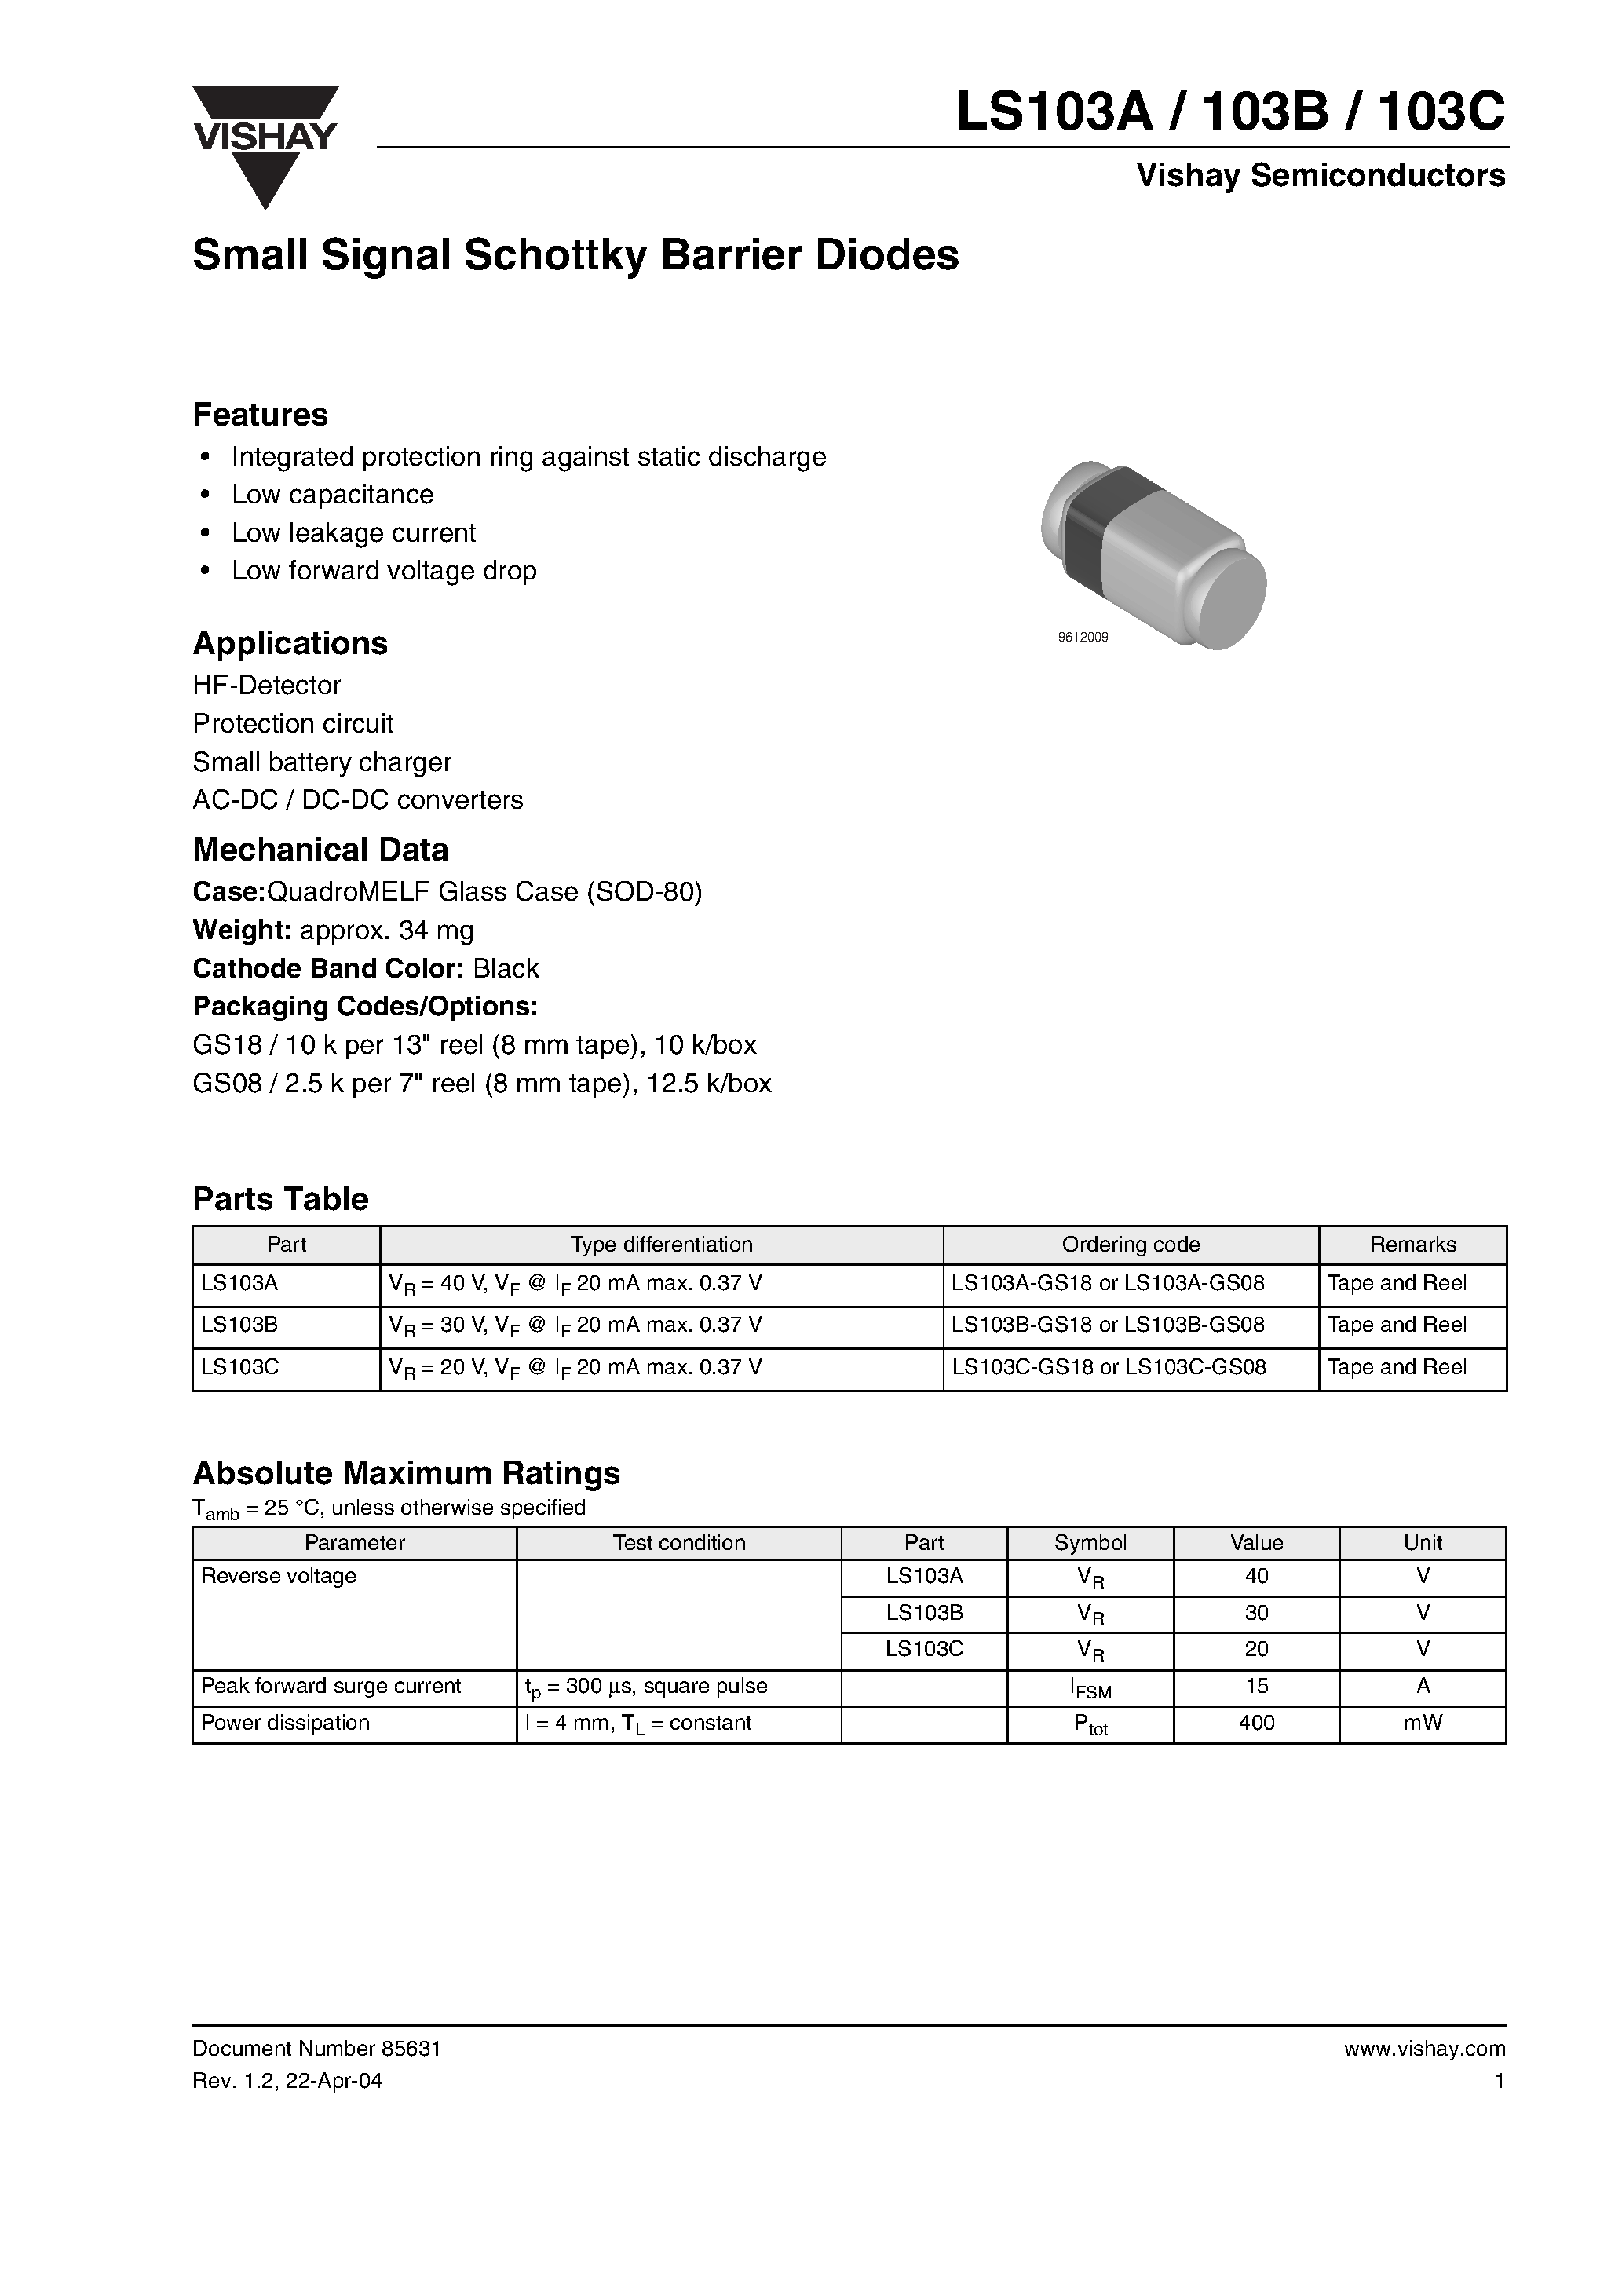 Datasheet LS103C-GS18 - Small Signal Schottky Barrier Diodes page 1